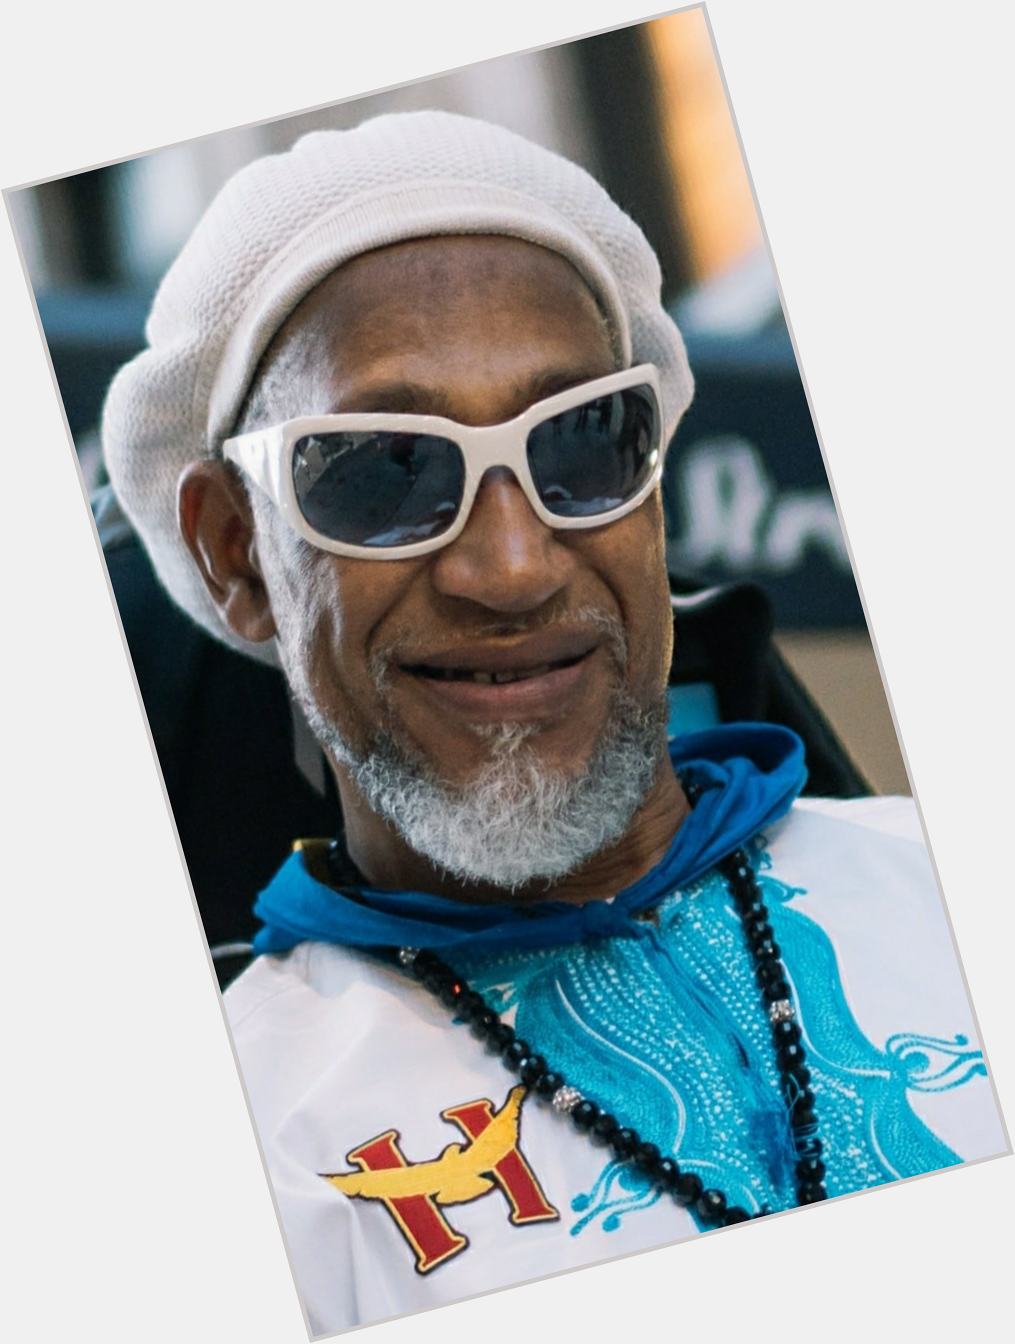 Happy birthday to a pioneer, a legend, the founding father of HipHop - DJ Kool Herc. 